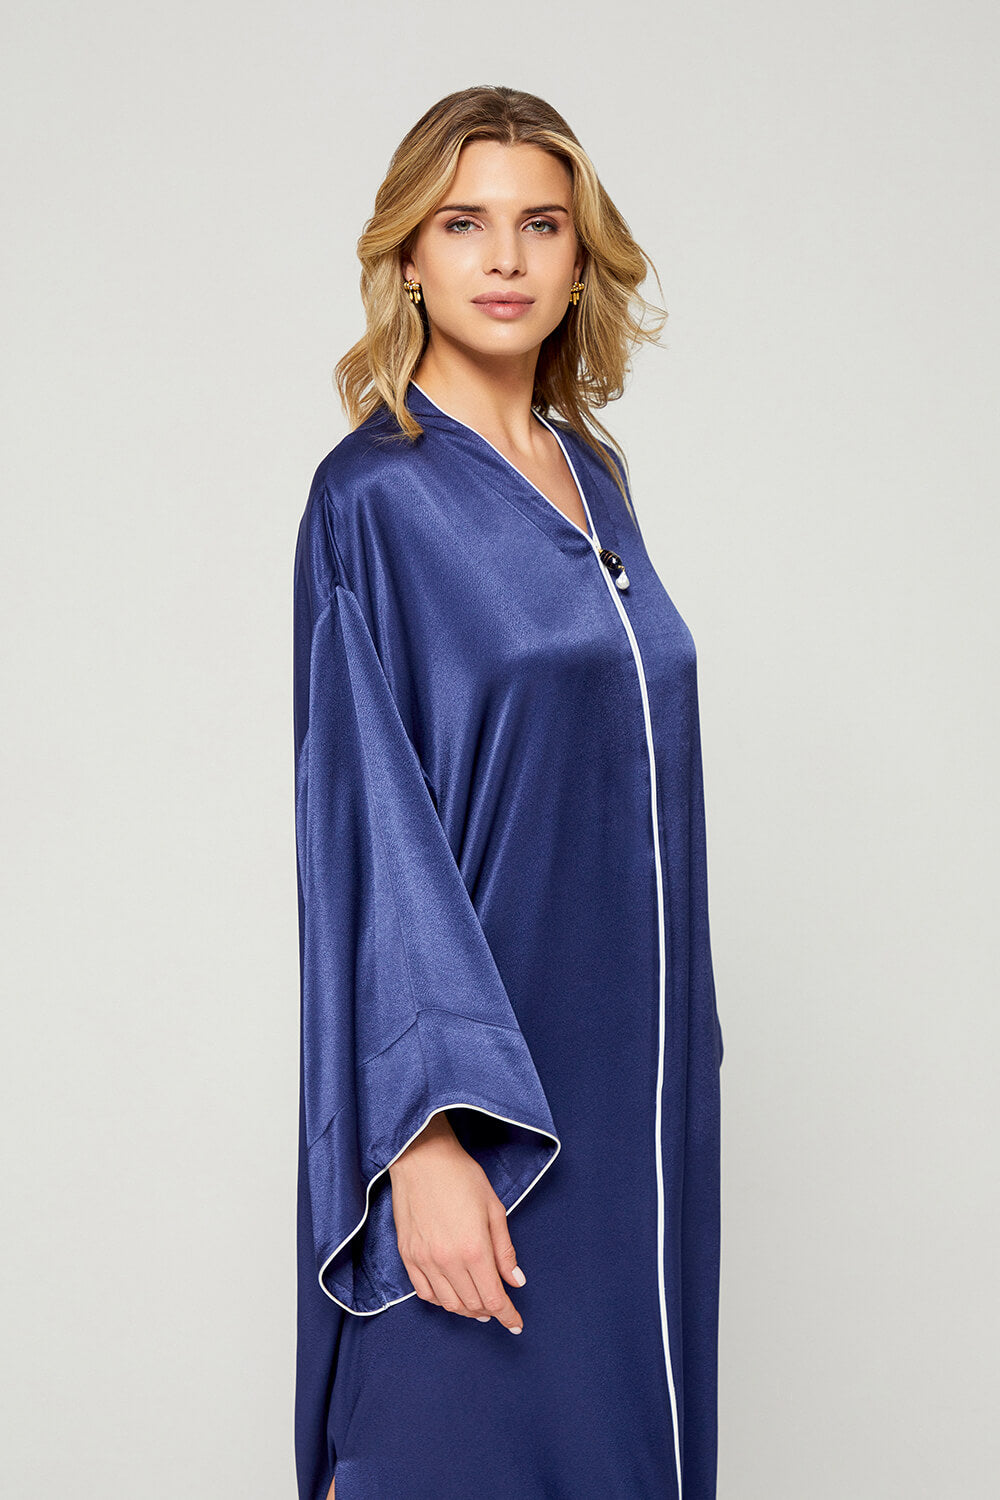 Ghada - Rayon Long Zippered Dress -Navy Blue with Off White Tape Details